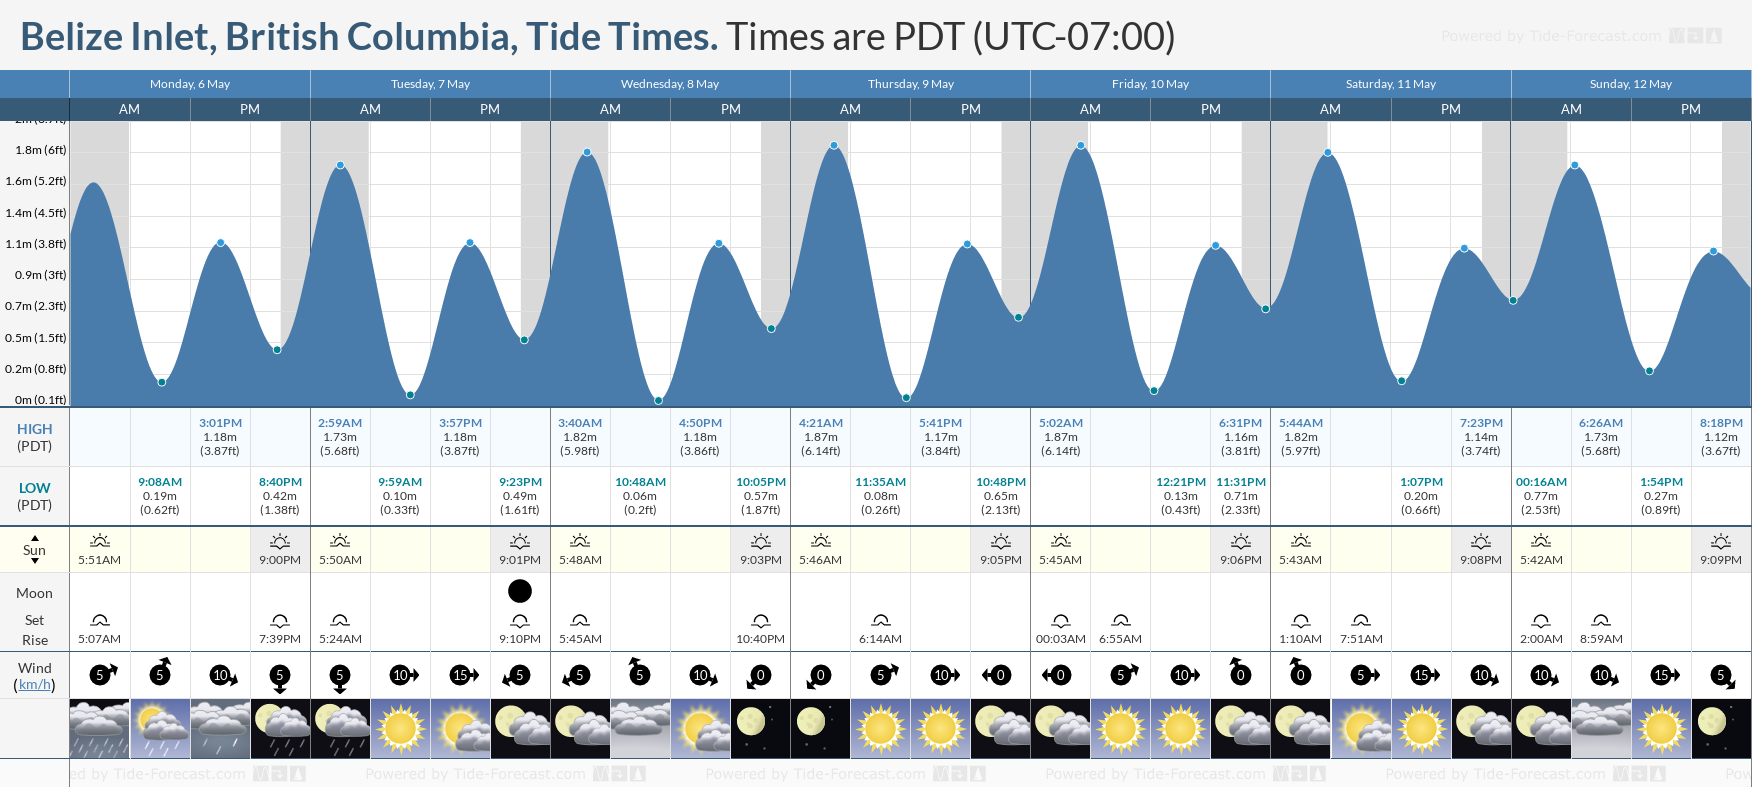 Belize Inlet, British Columbia Tide Chart including high and low tide tide times for the next 7 days